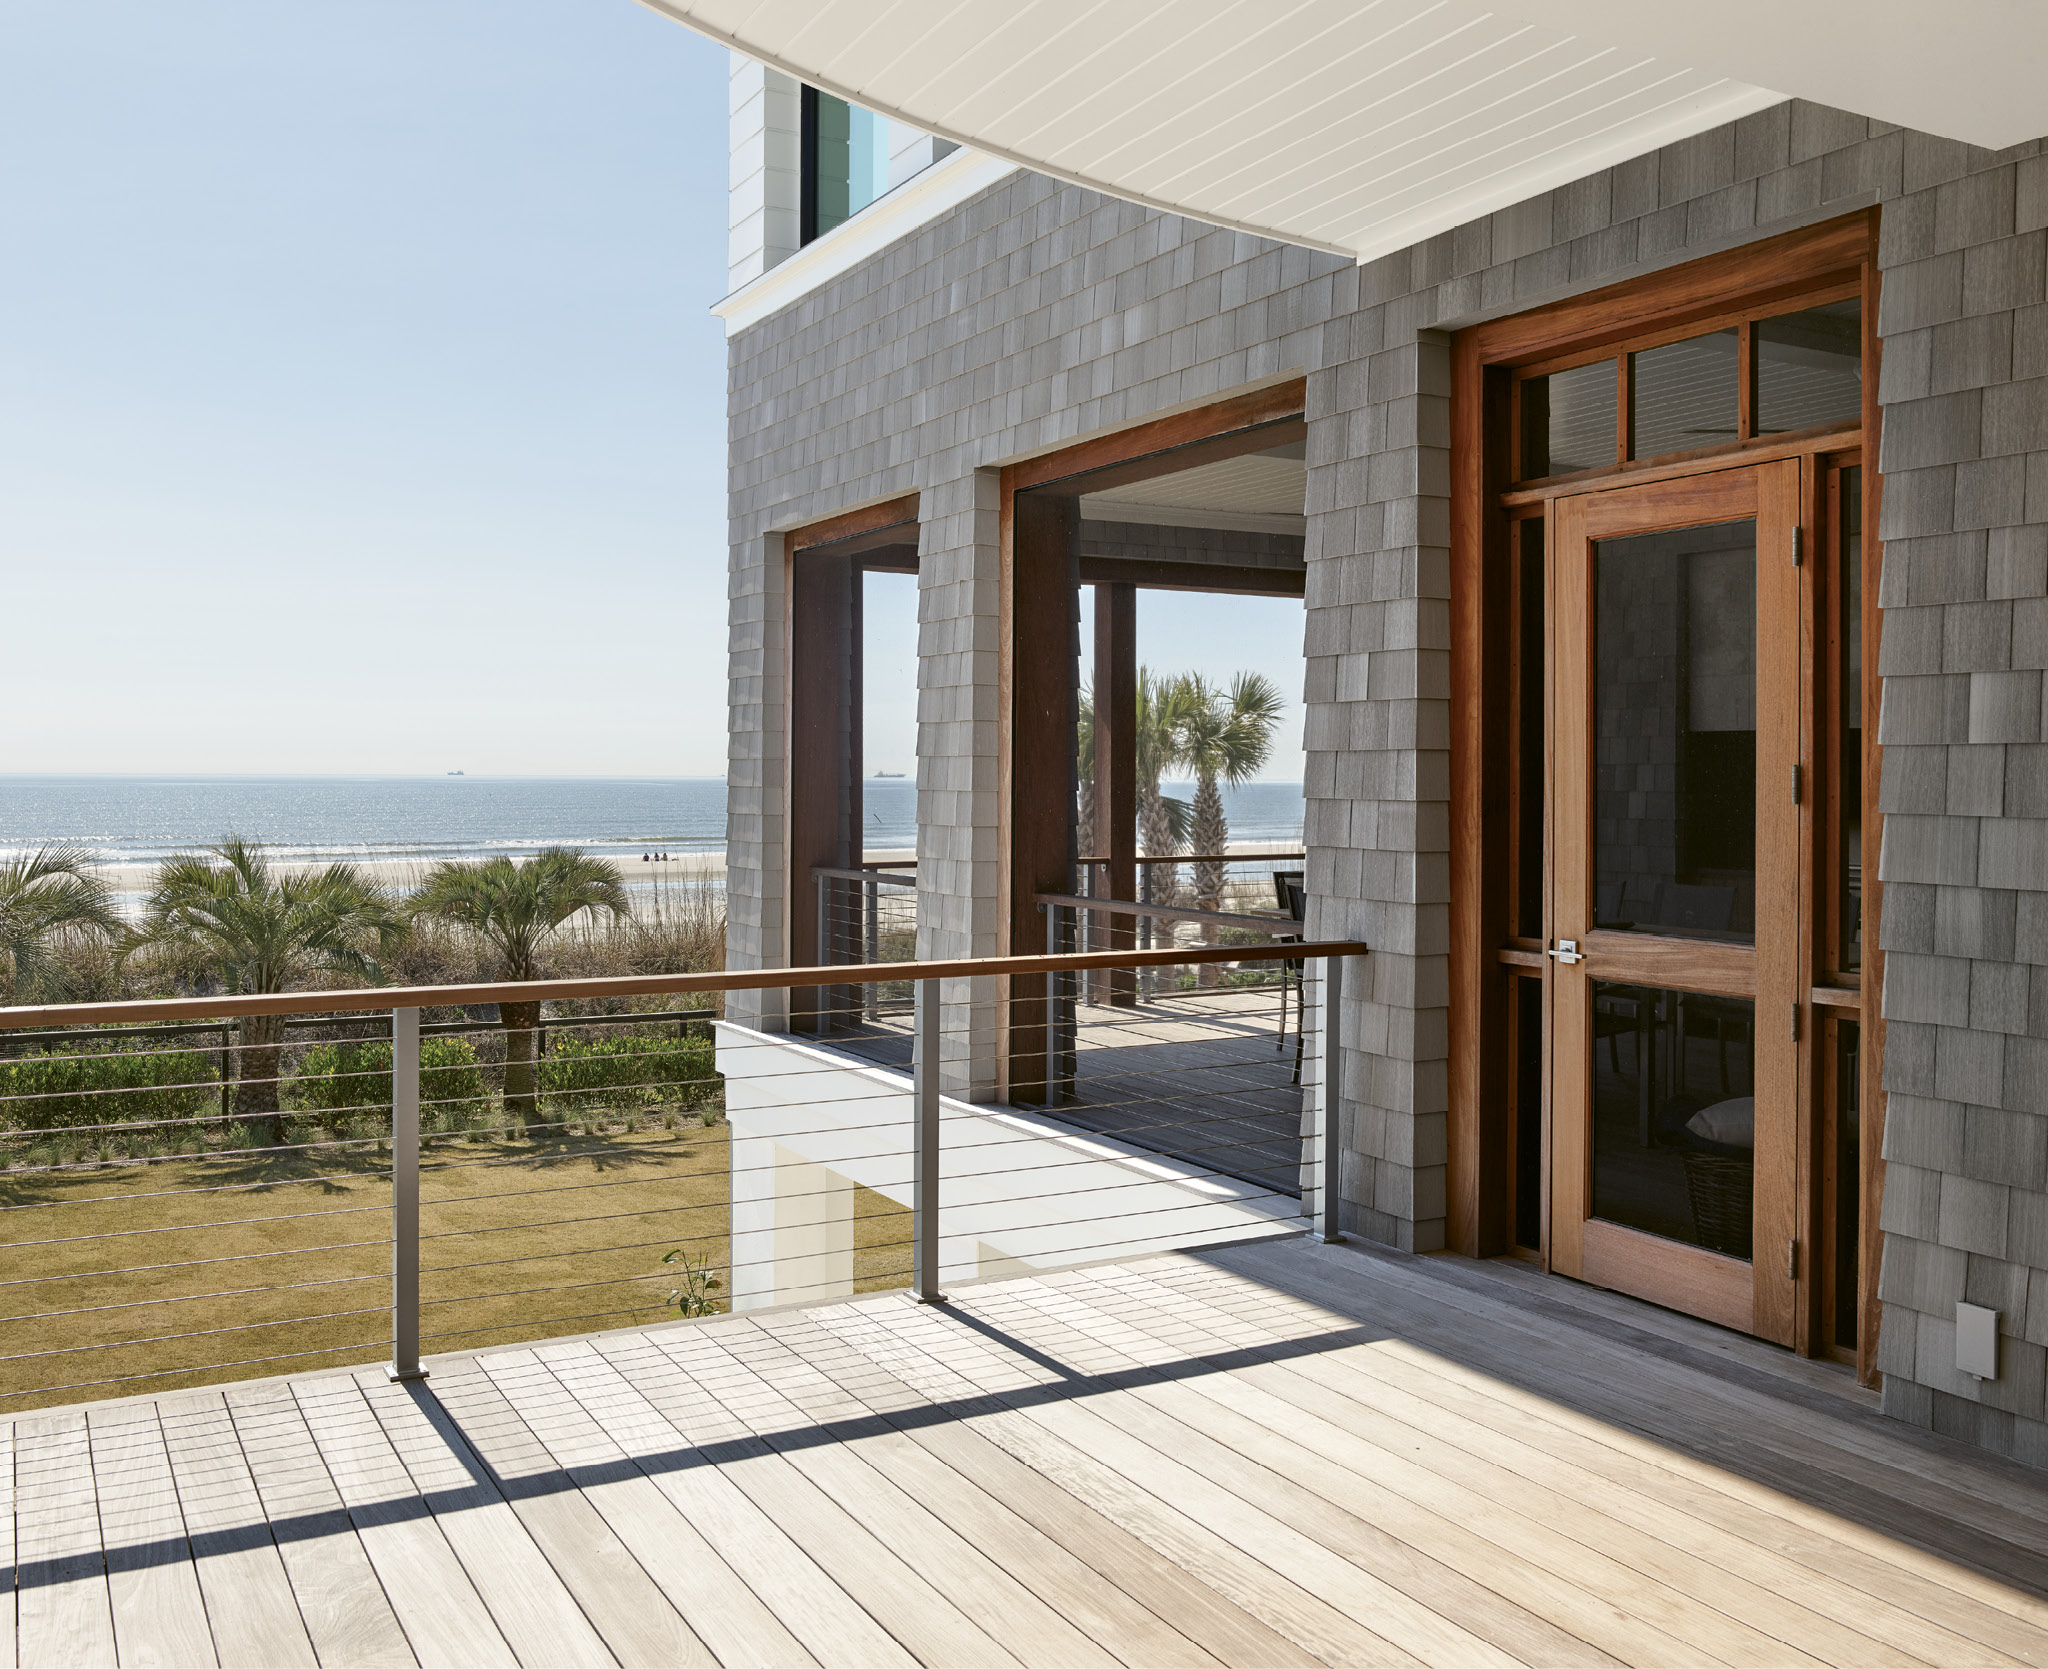 The outdoors and indoors meld seamlessly as most rooms have ocean views. For the exterior, builder Zac Naramore chose NuCedar shingles, a synthetic product with the colors extruded into the finish for a weathered, authentic look.